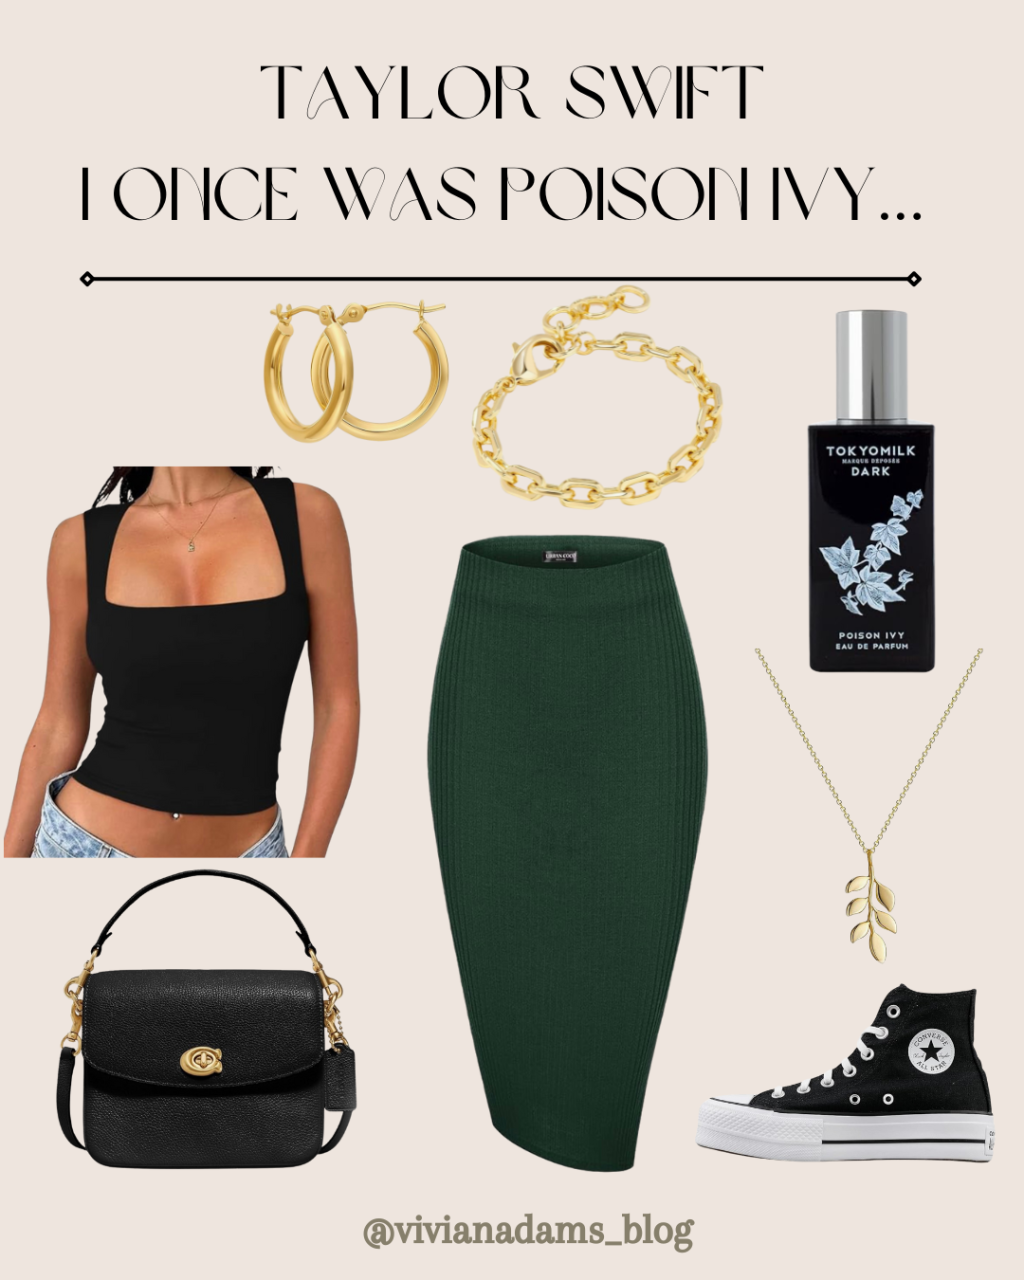 Taylor Swift Inspired Outfits: I Once Was Poison Ivy But Now I’m Your Daisy